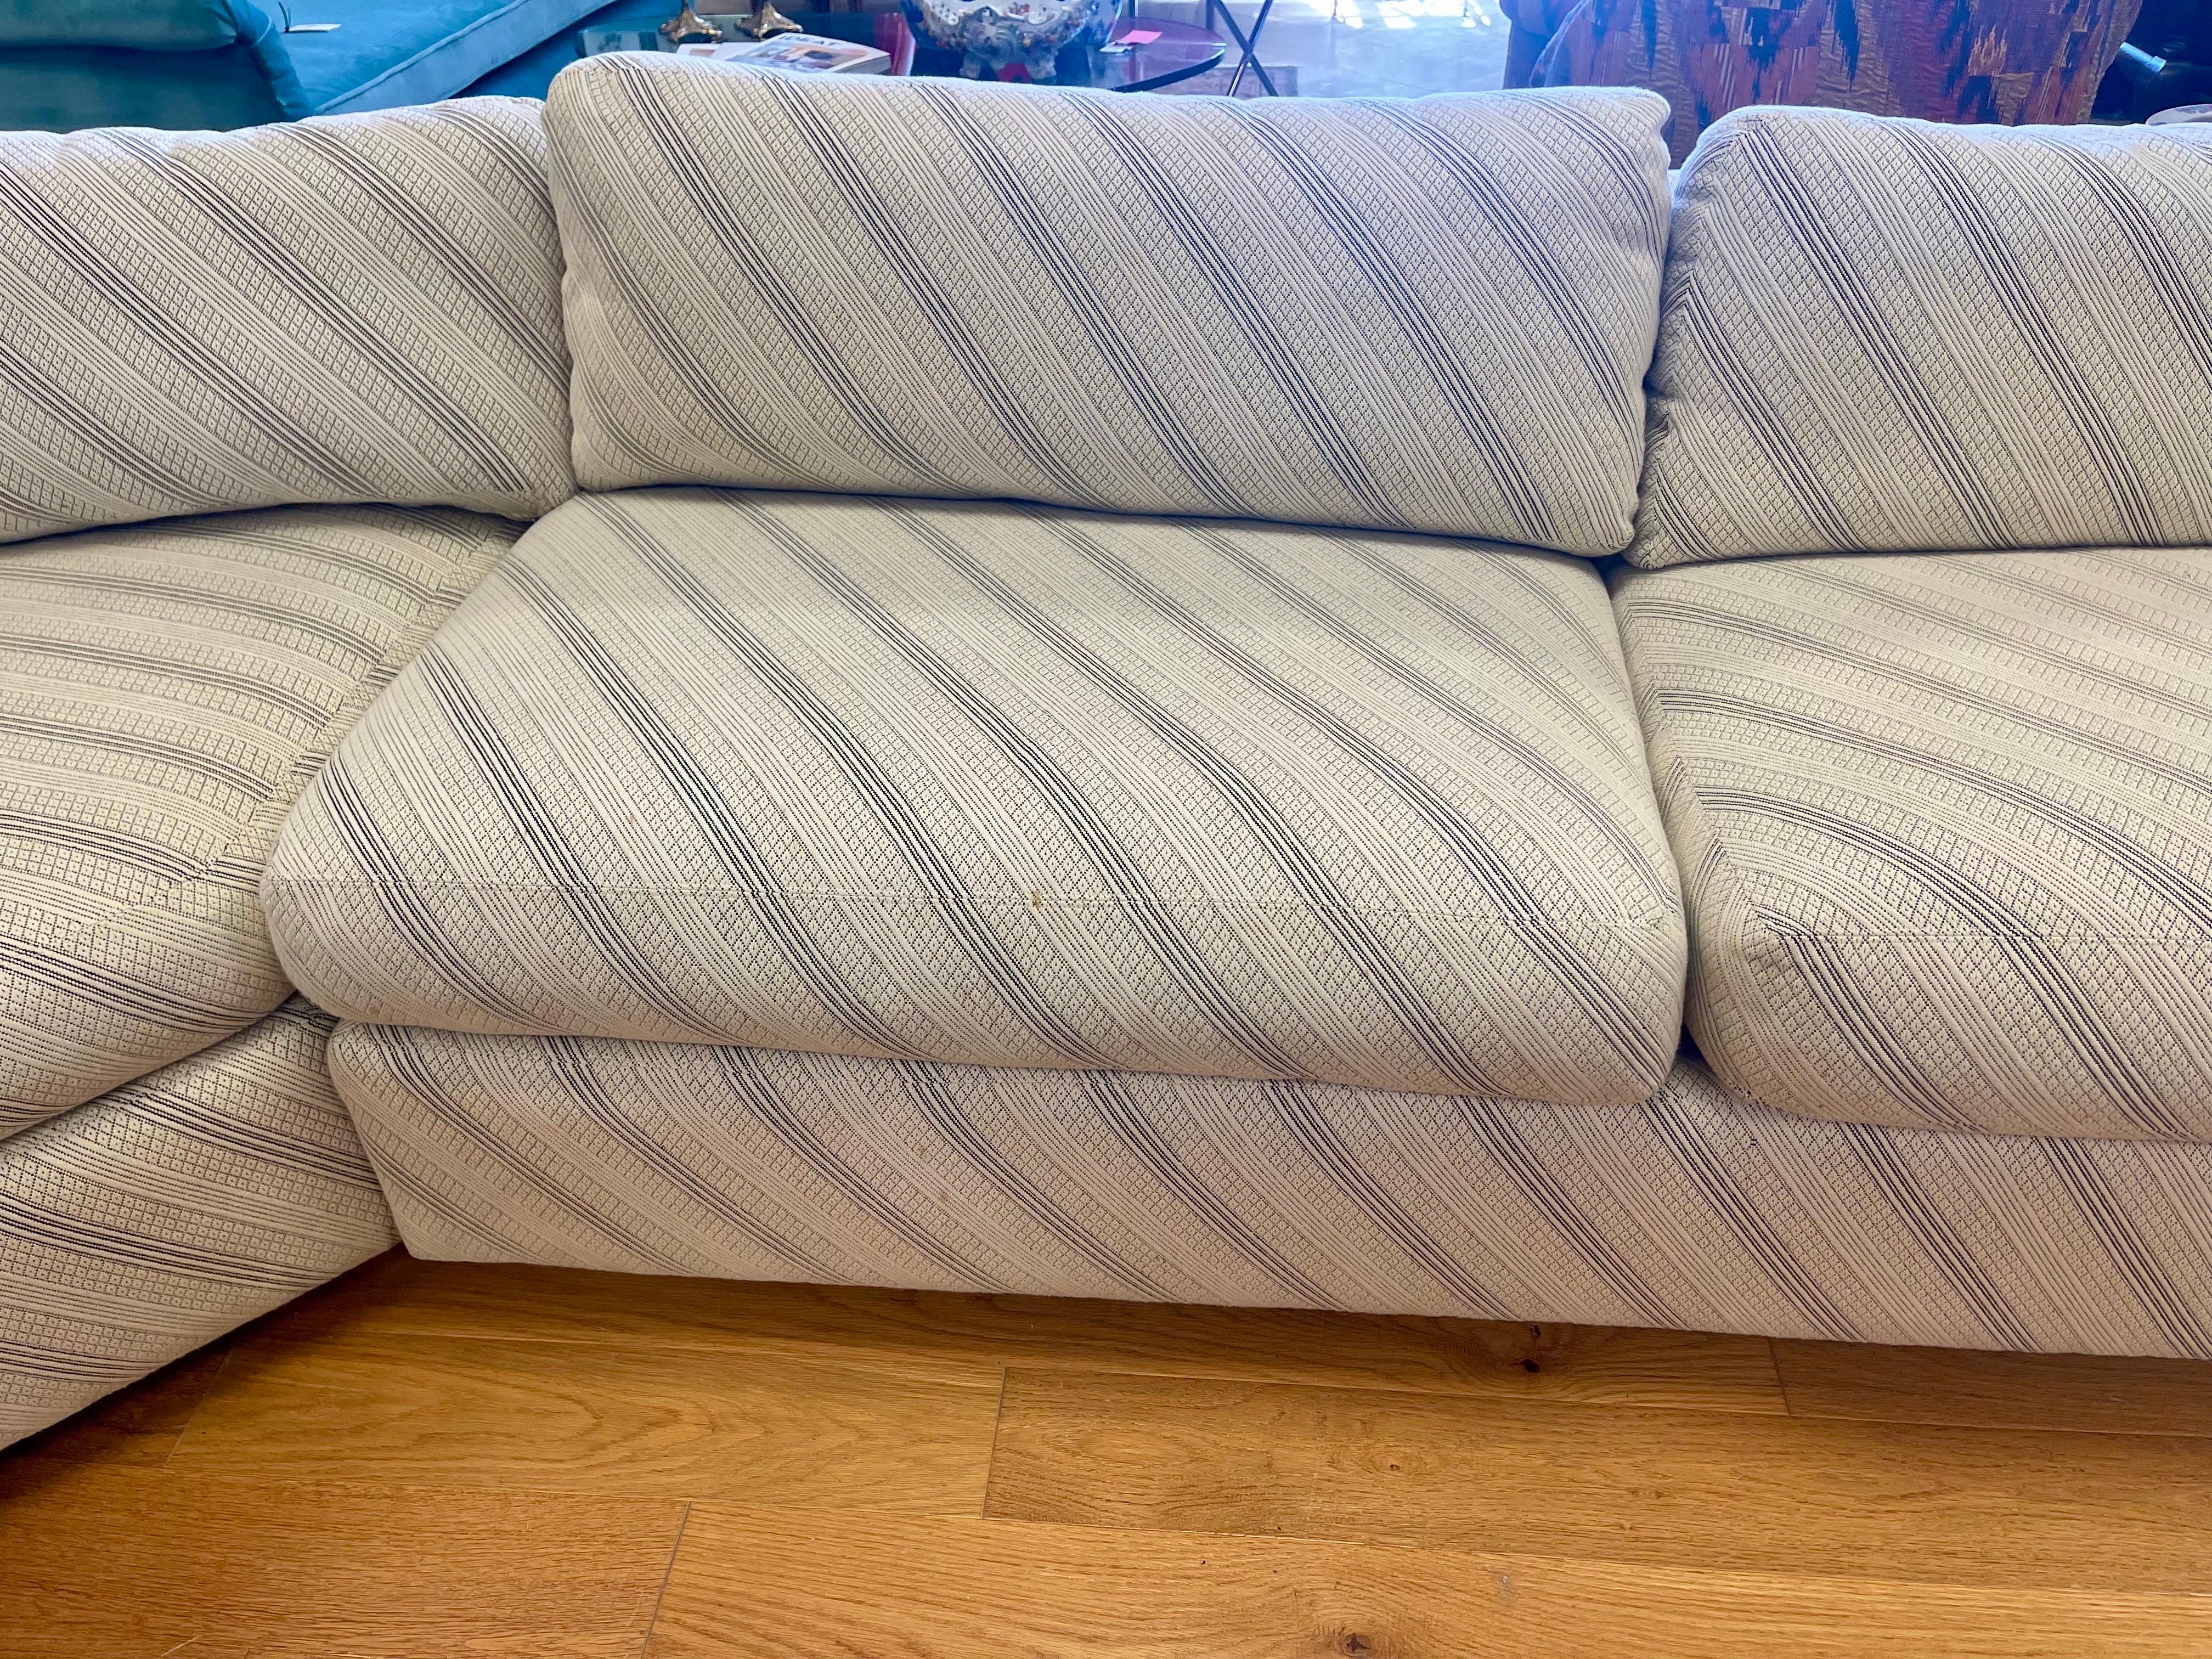 Late 20th Century Signed Directional Furniture Mid Century Modern 3PC Curved Sectional Sofa For Sale